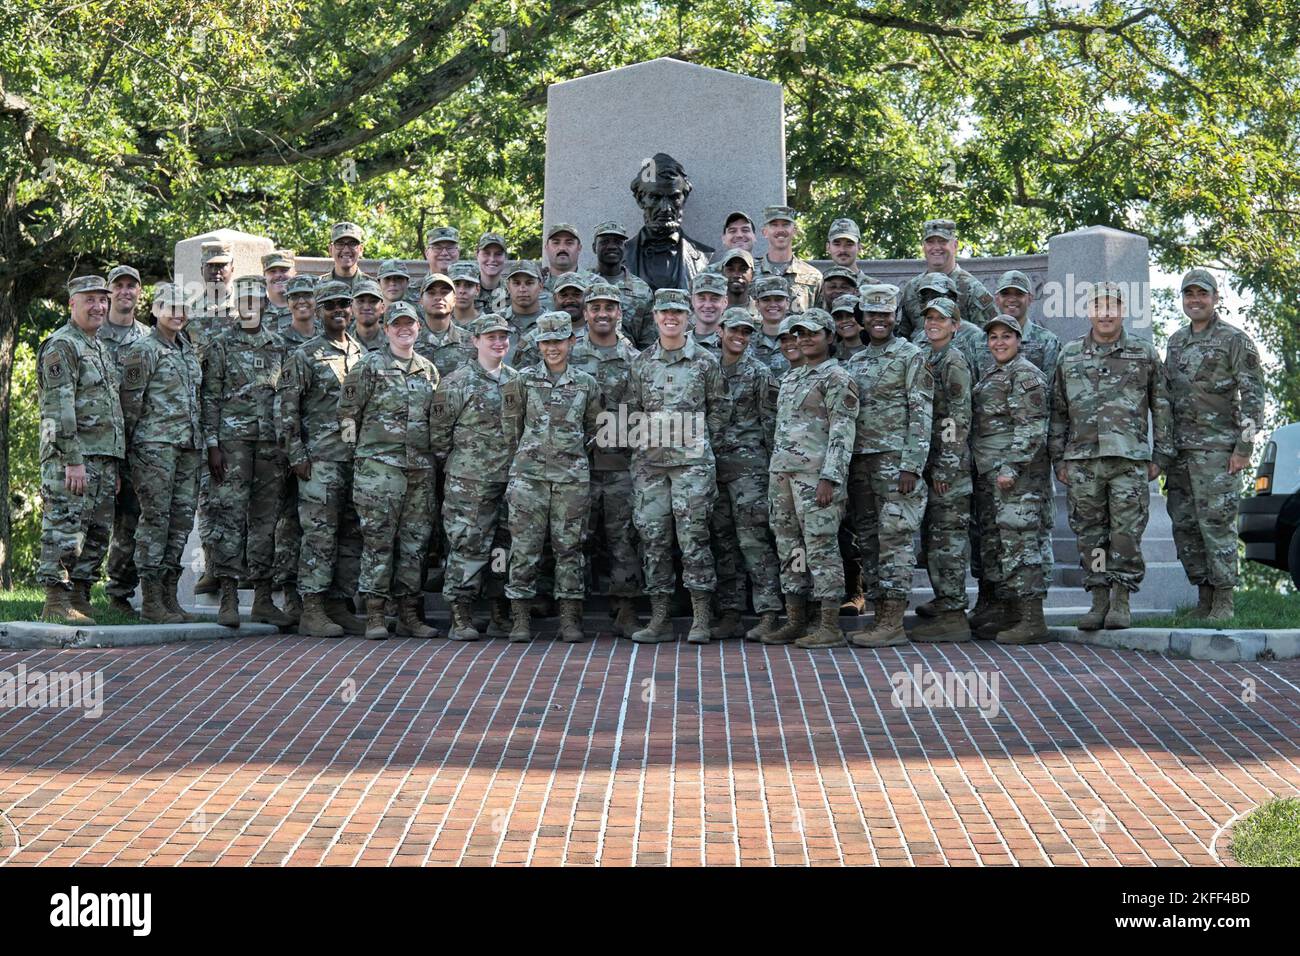 A group photo of the 105th Medical Group, New York National Guard (NYNG) CBRN Task Force Medical Element at Gettysburg, Pennsylvania, after completing a NYNG joint training exercise and external evaluation of the CBRN Task Force and Homeland Response Force for FEMA Region II, in Fort Indiantown Gap, Pennsylvania, September 13, 2022. Stock Photo